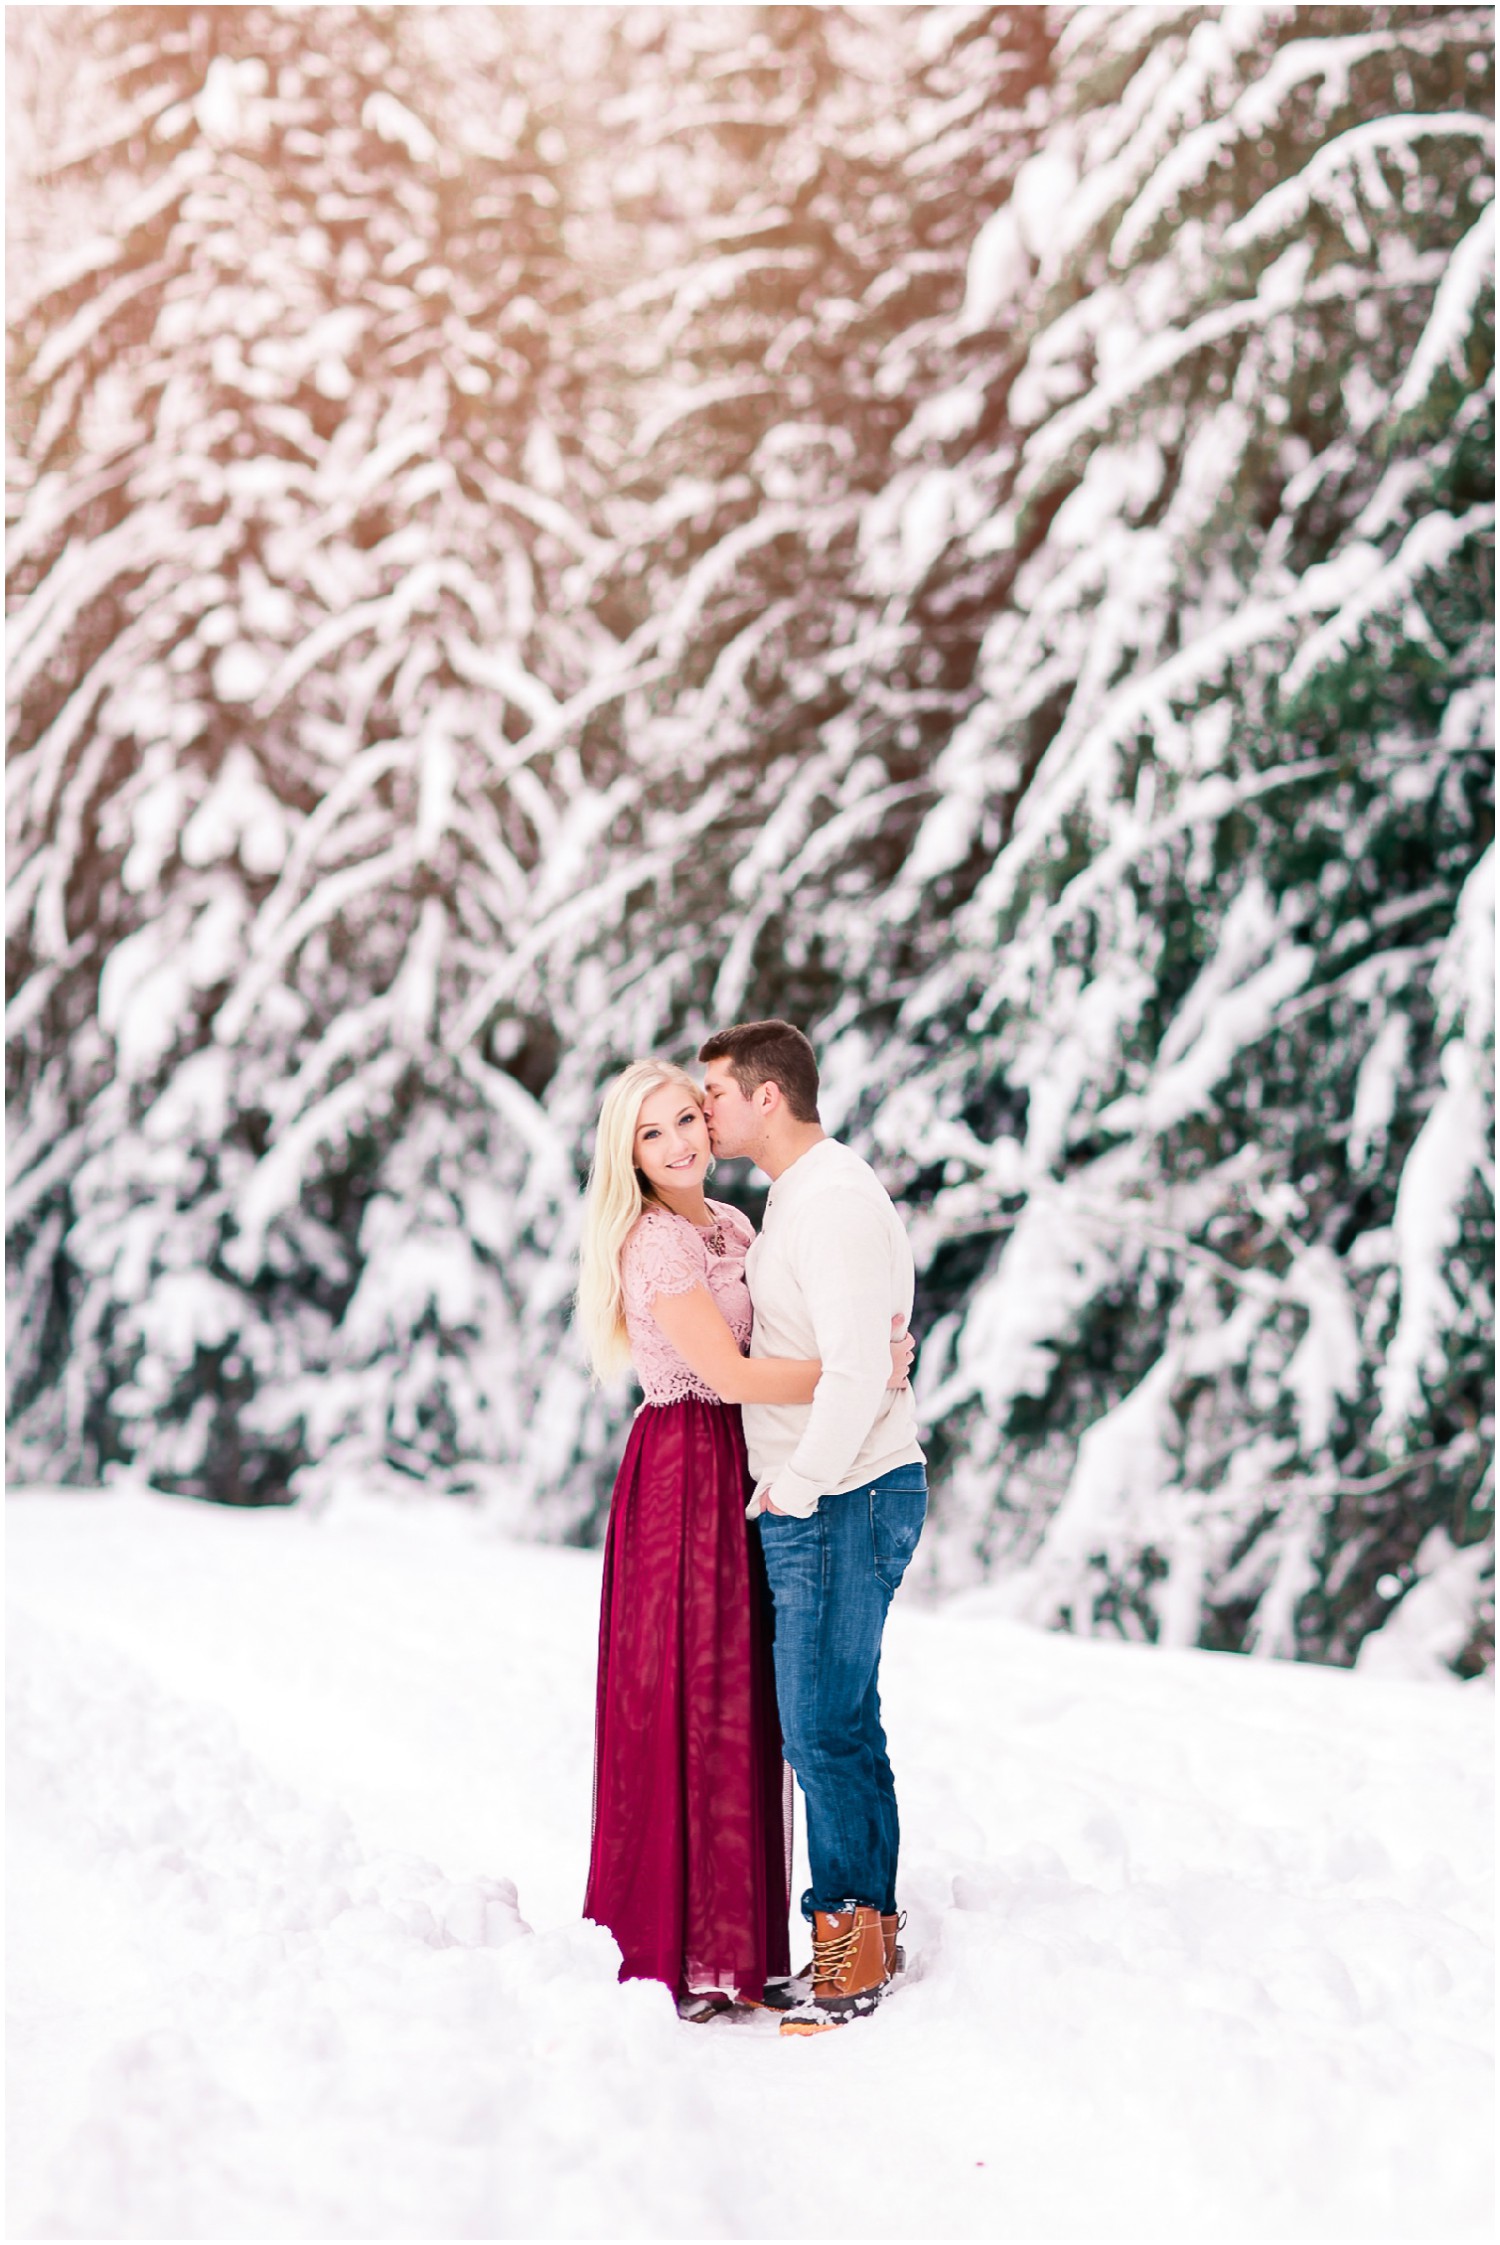 A Magical Winter Engagement Session at Gold Creek Pond